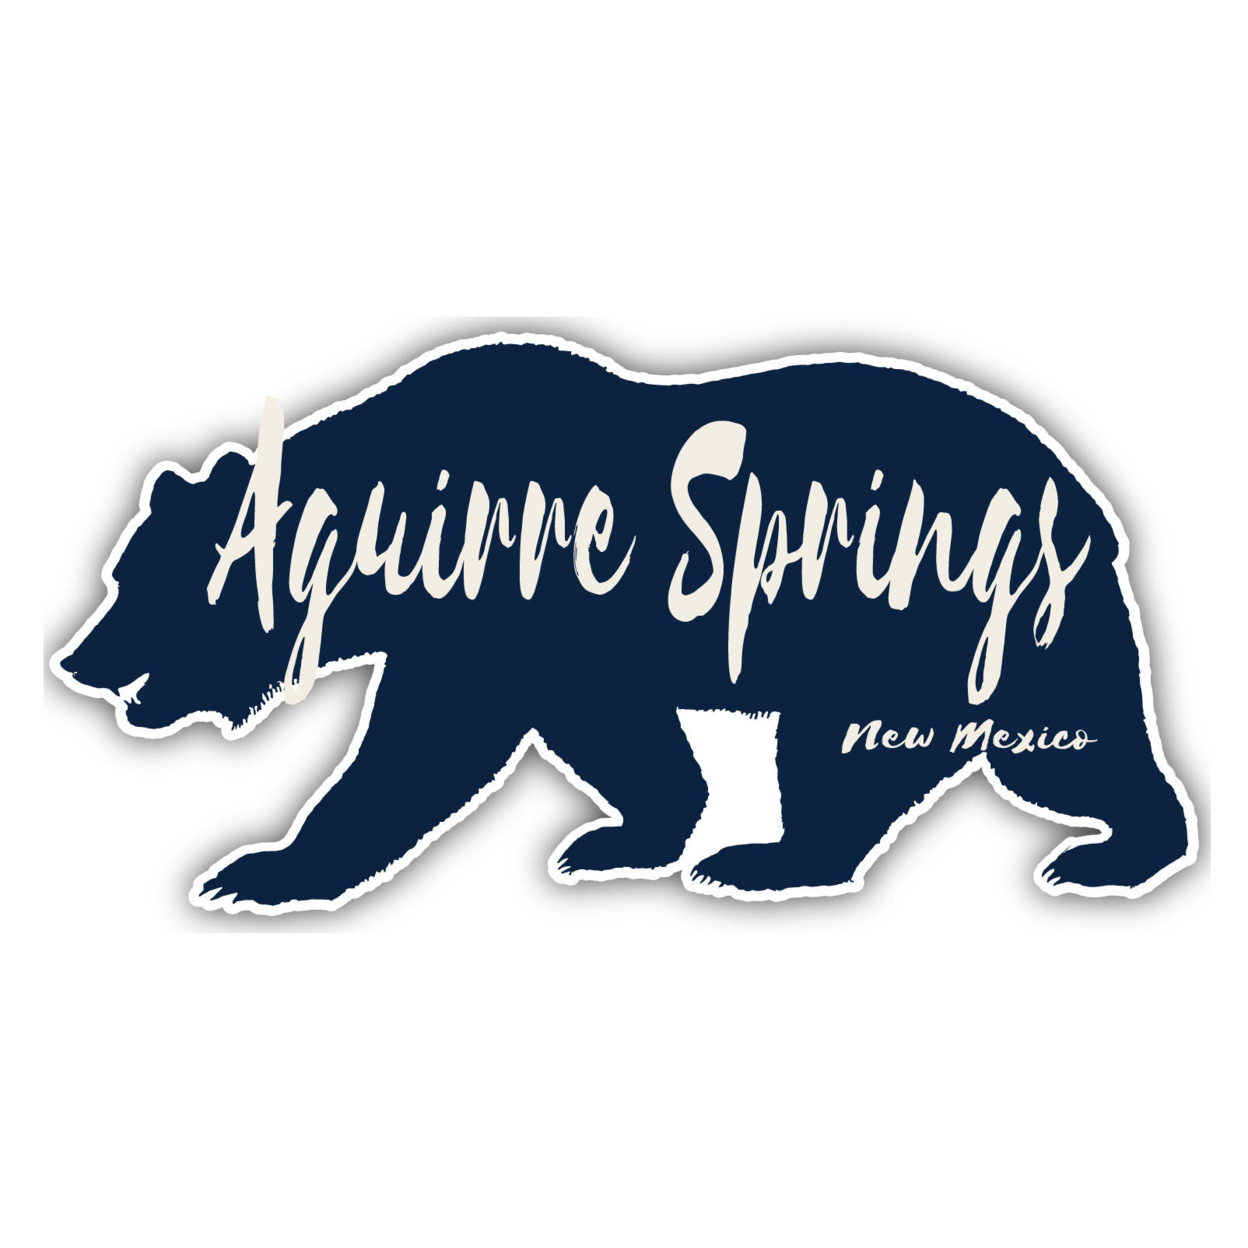 Aguirre Springs New Mexico Souvenir Decorative Stickers (Choose Theme And Size) - Single Unit, 8-Inch, Bear